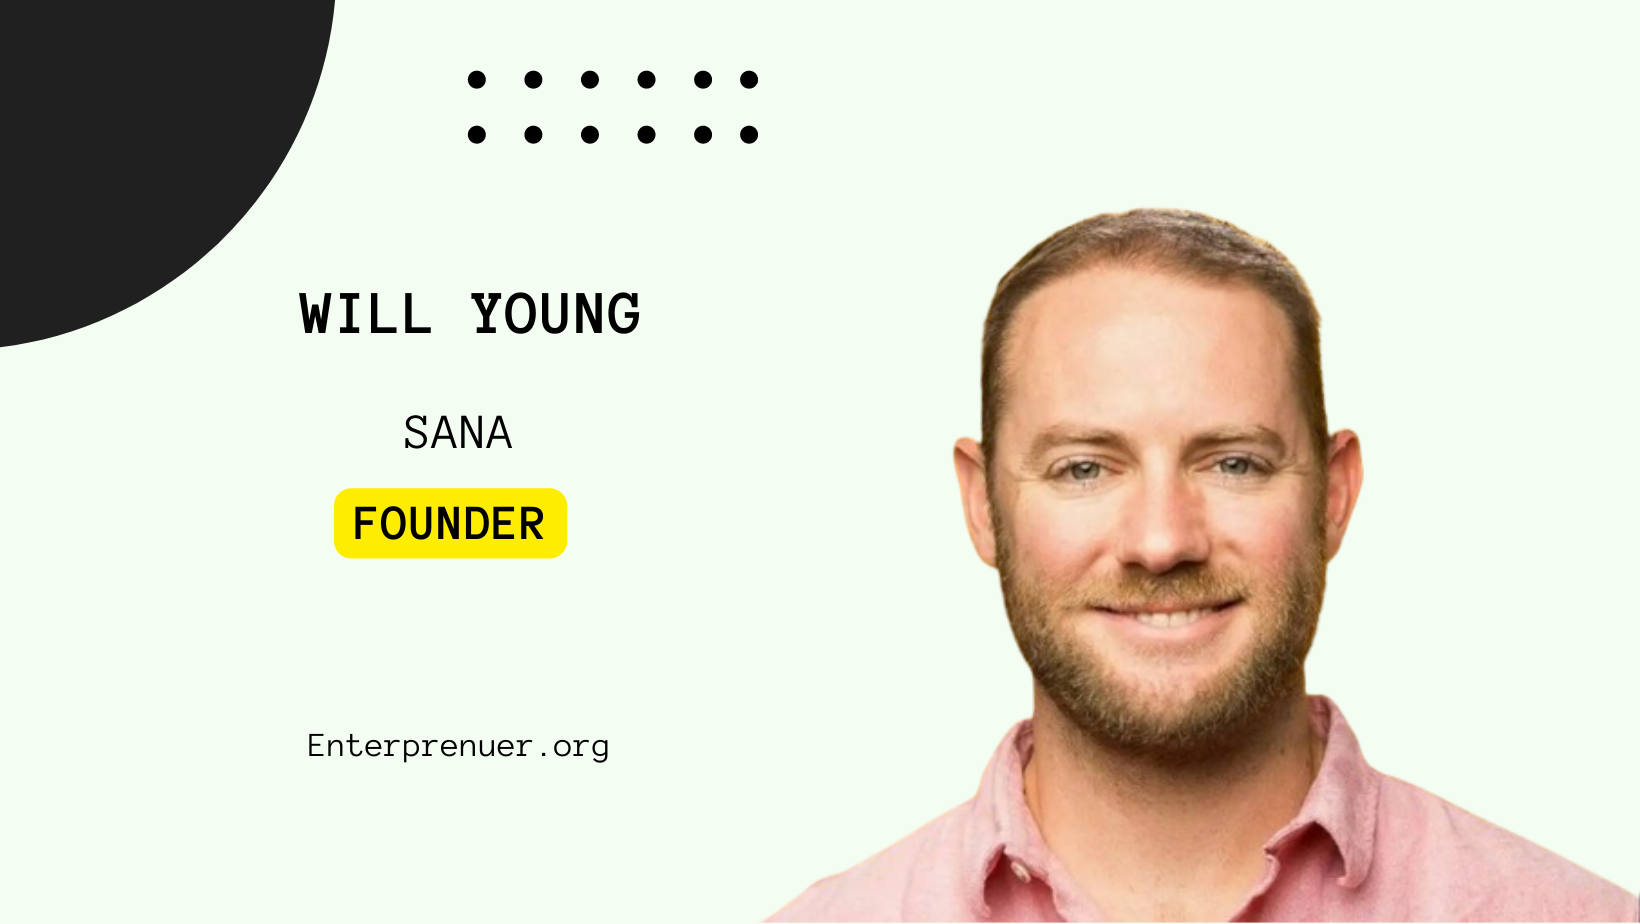 Will Young Co-Founder of Sana